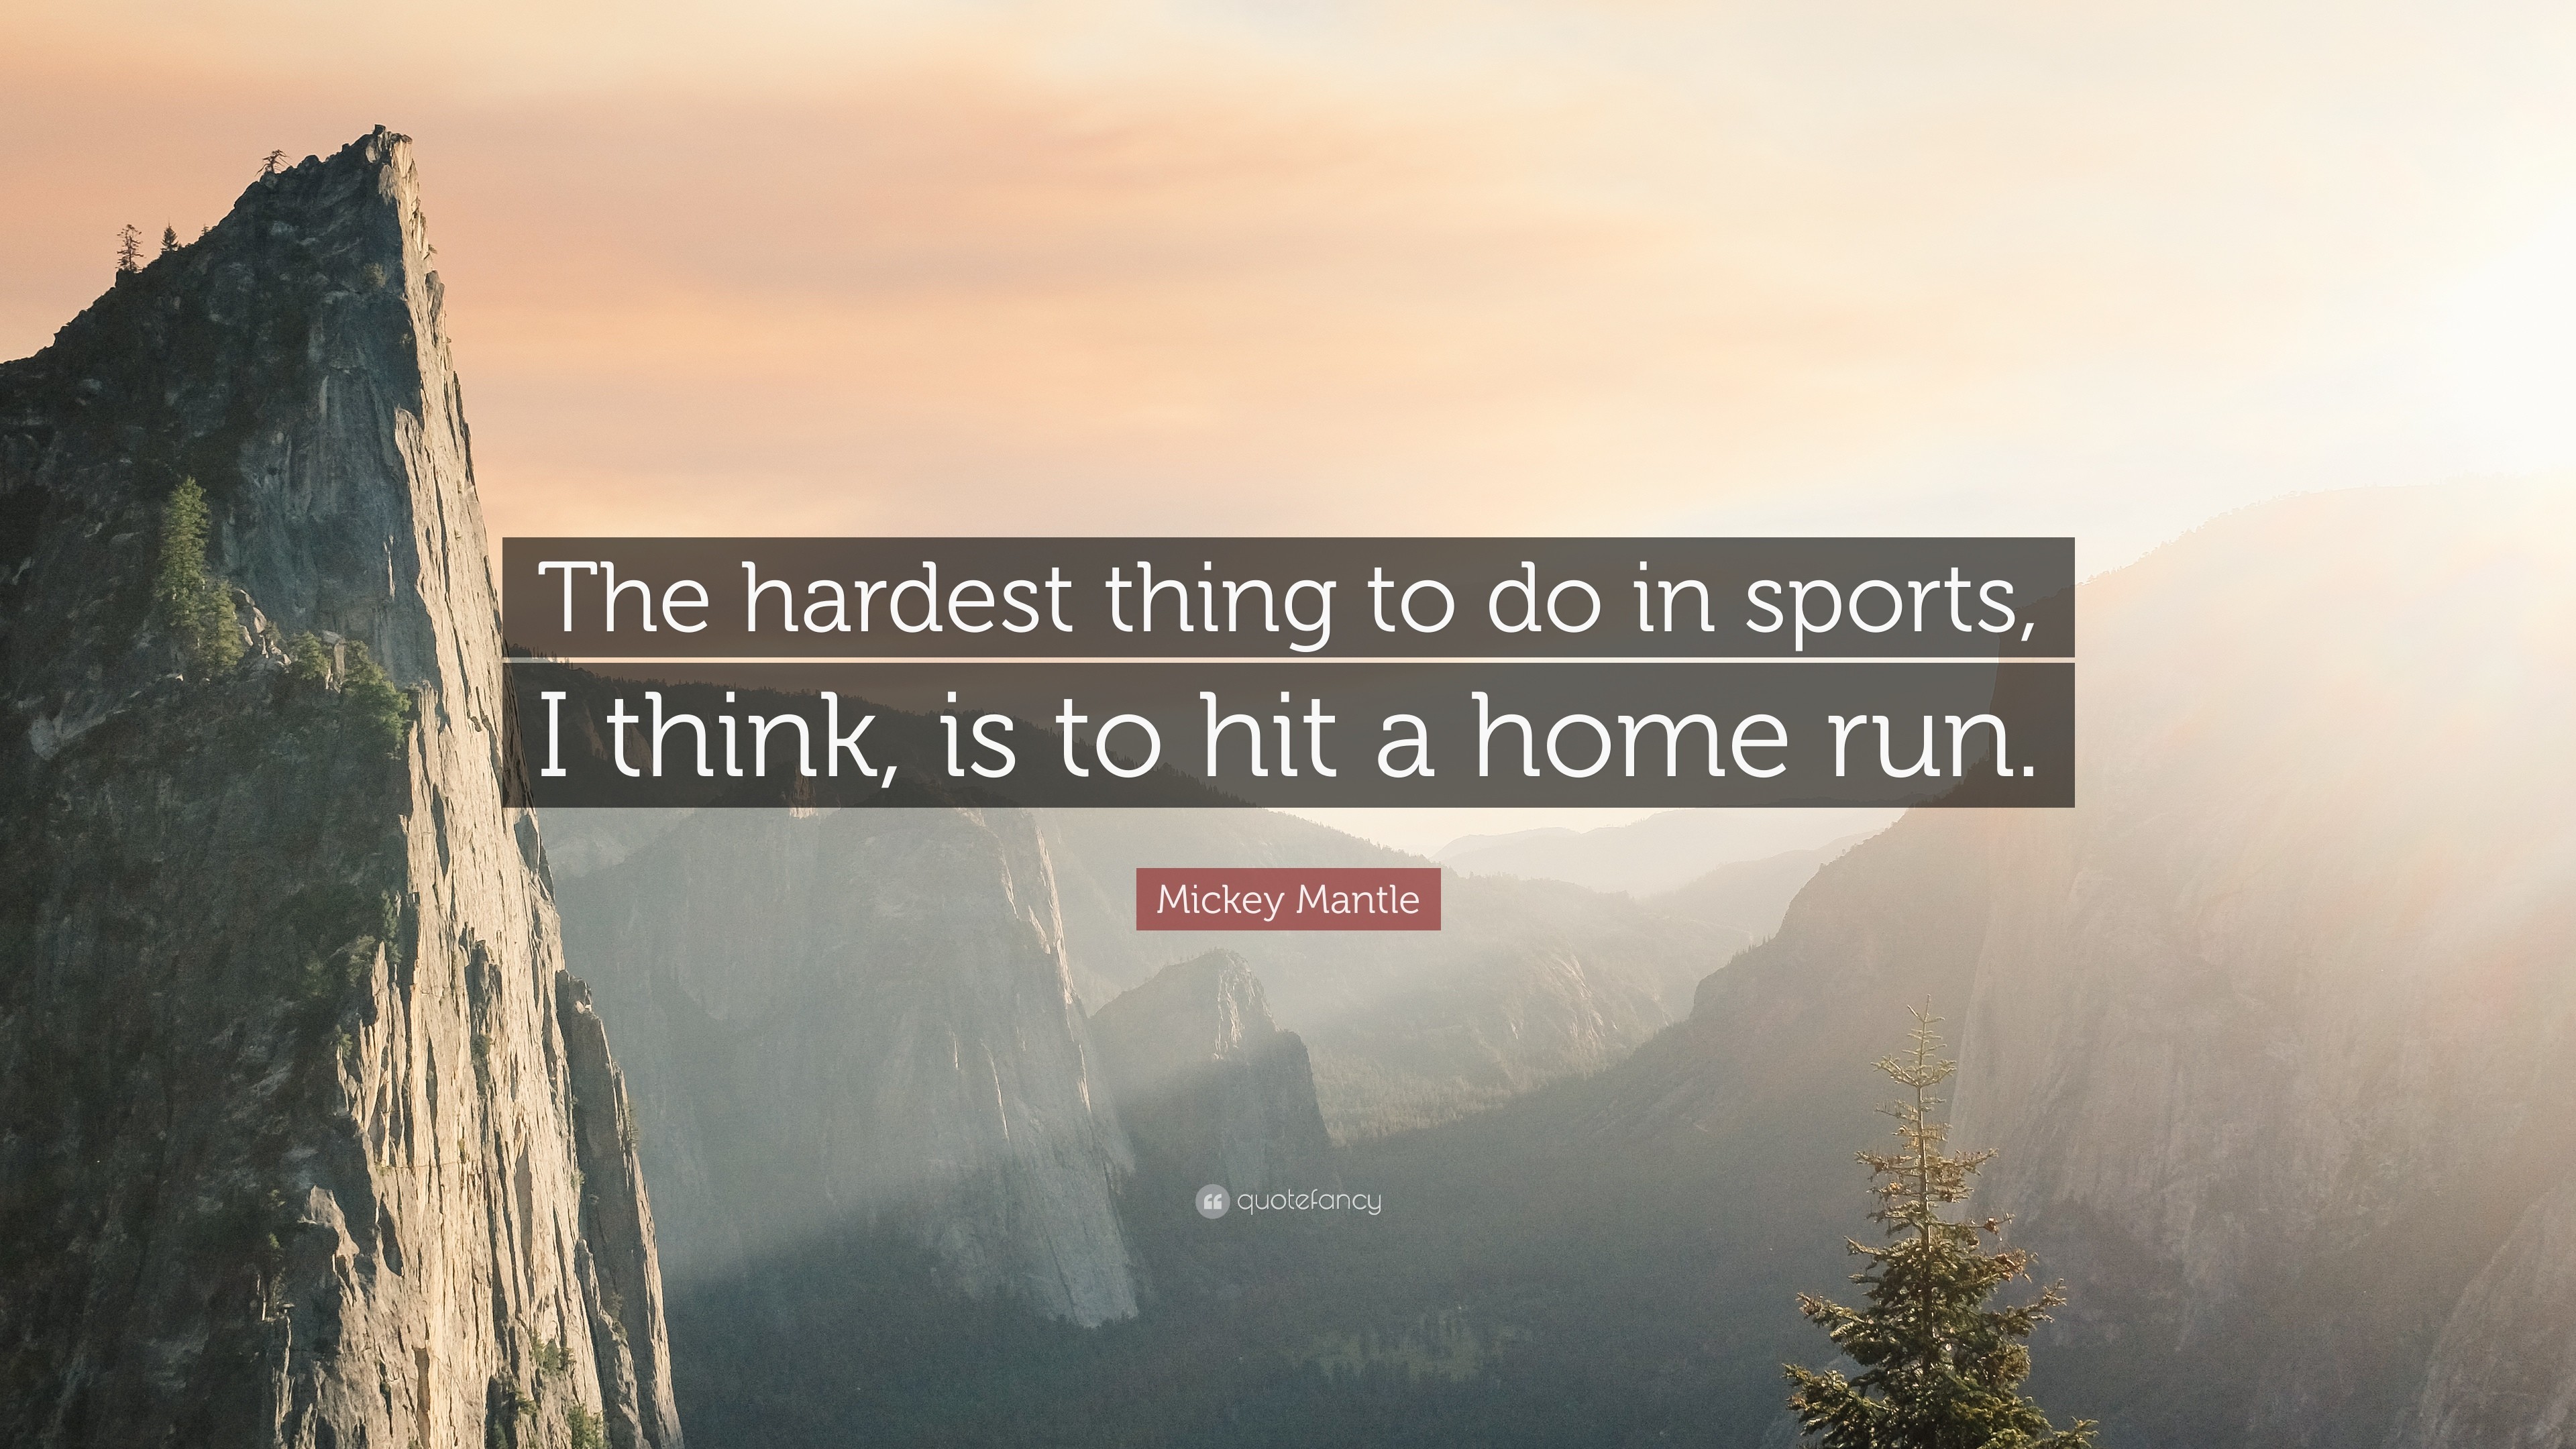 3840x2160 Mickey Mantle Quote: “The hardest thing to do in sports, I think,